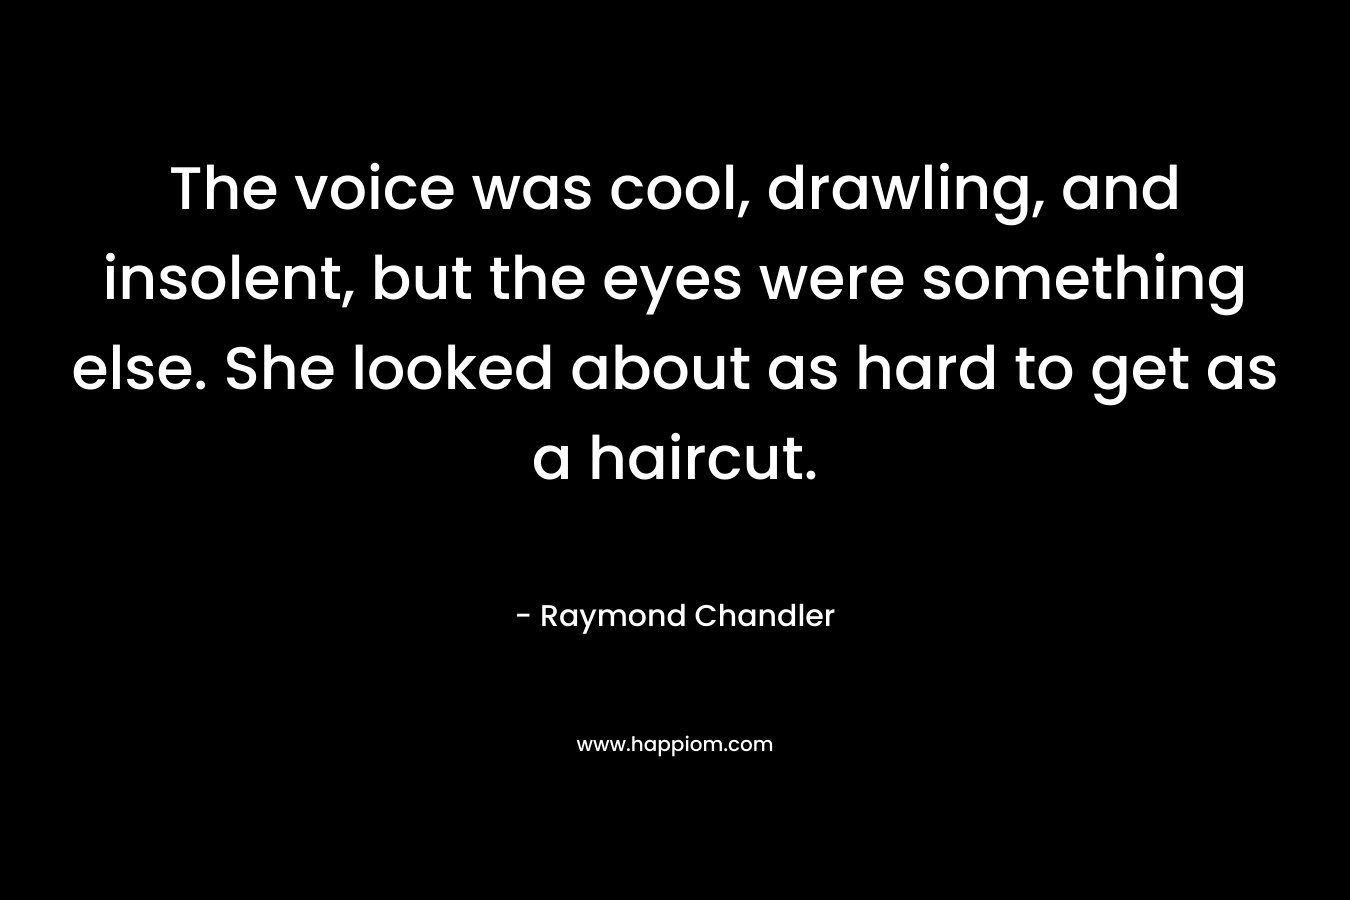 The voice was cool, drawling, and insolent, but the eyes were something else. She looked about as hard to get as a haircut.